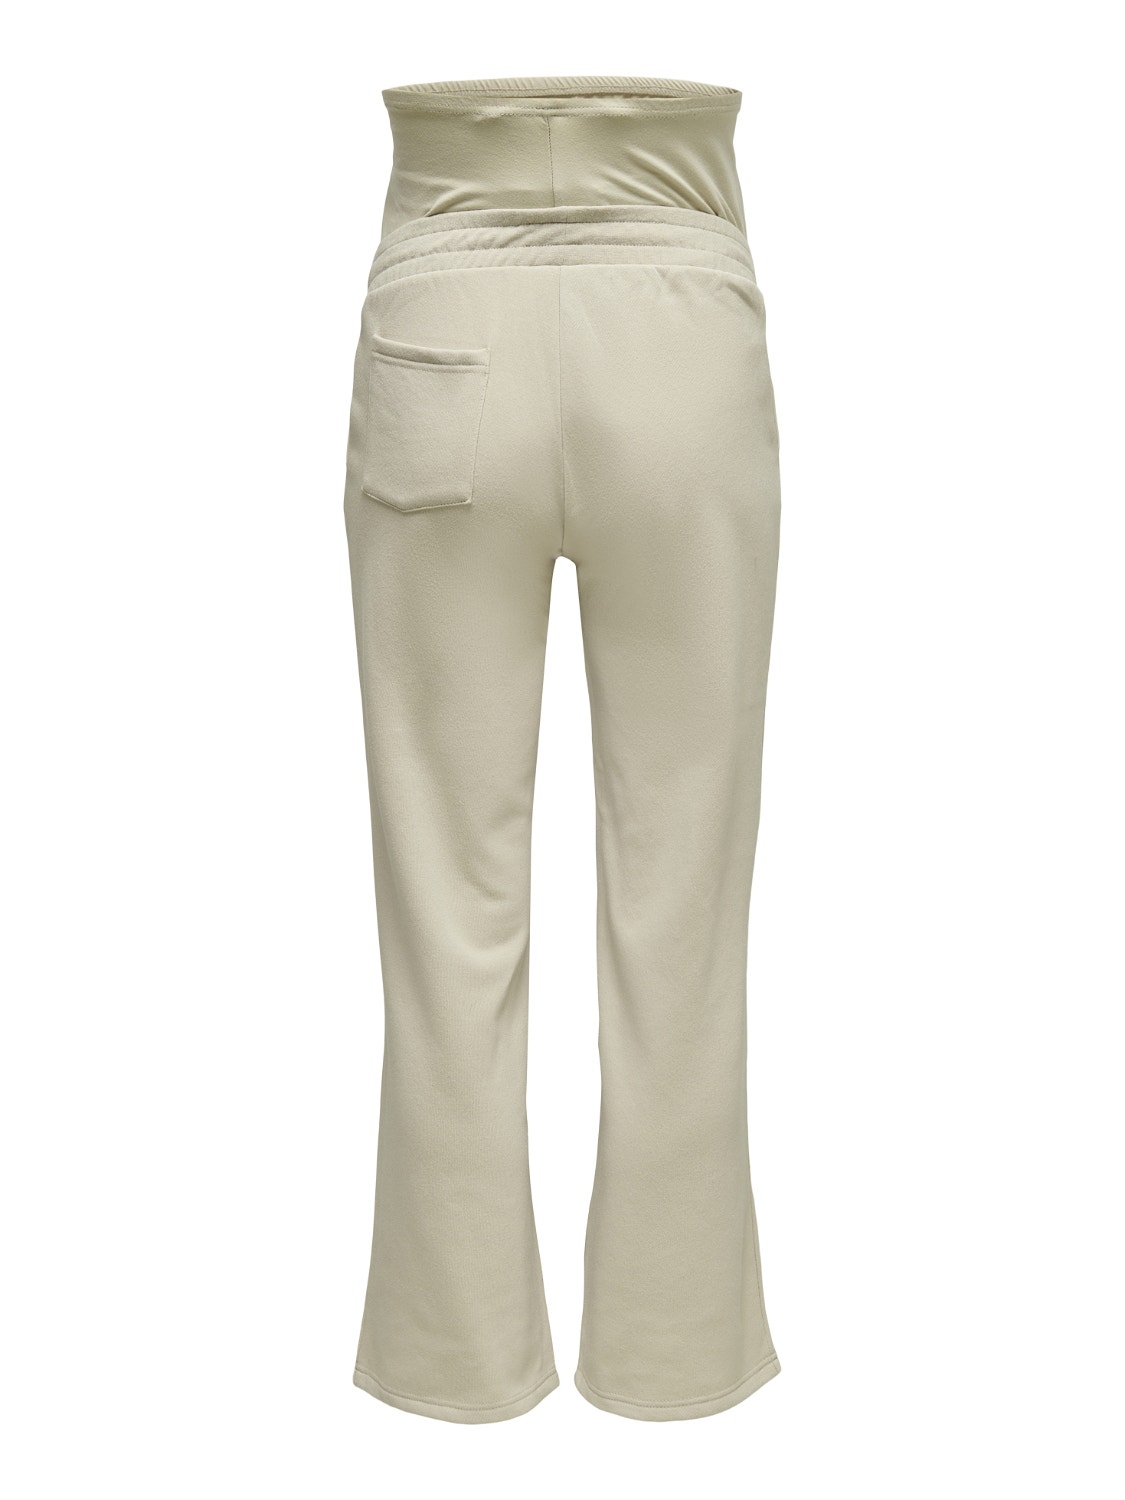 ONLY Regular Fit Flared legs Trousers -Silver Lining - 15257032